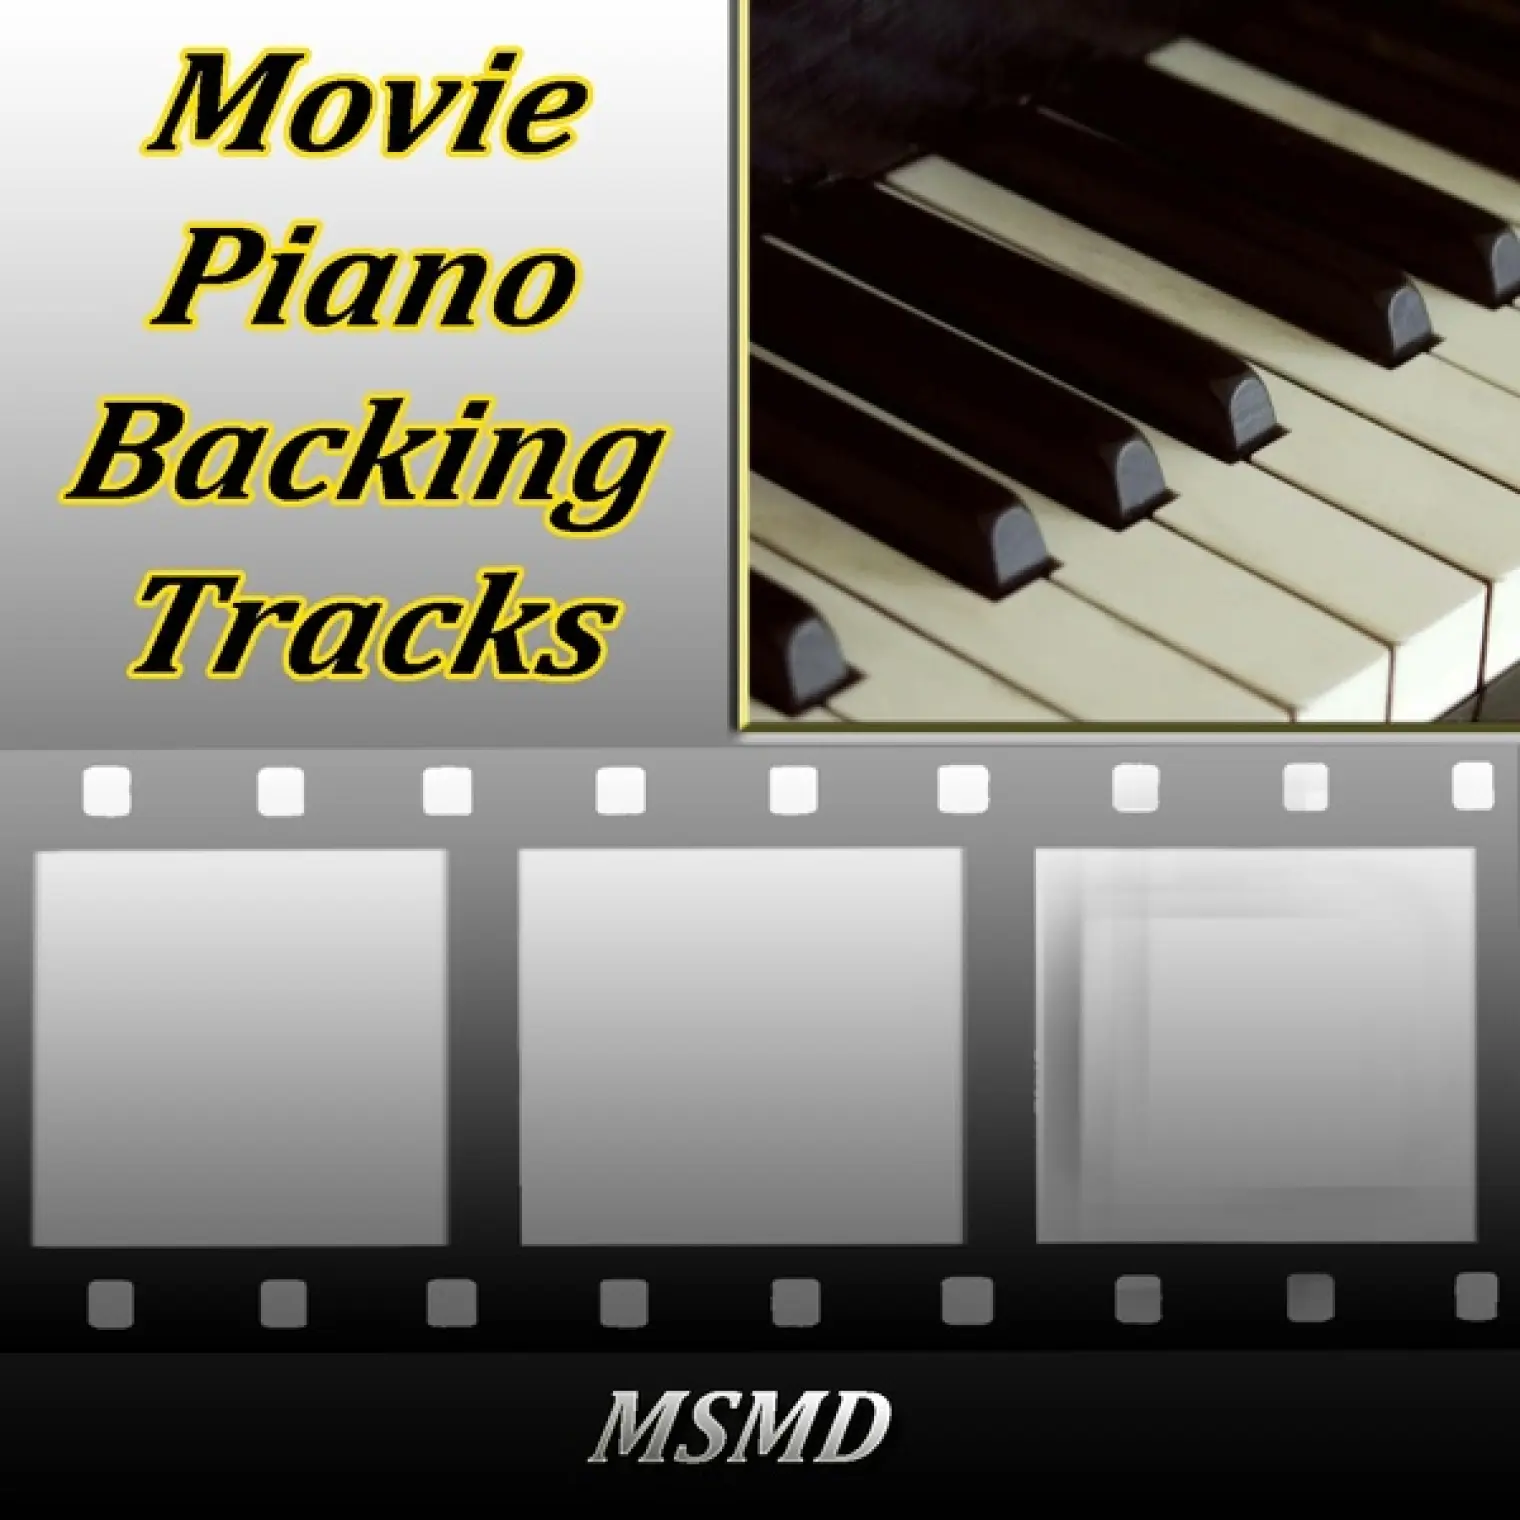 Movie Piano Backing Tracks (The Best Collection) -  Msmd 